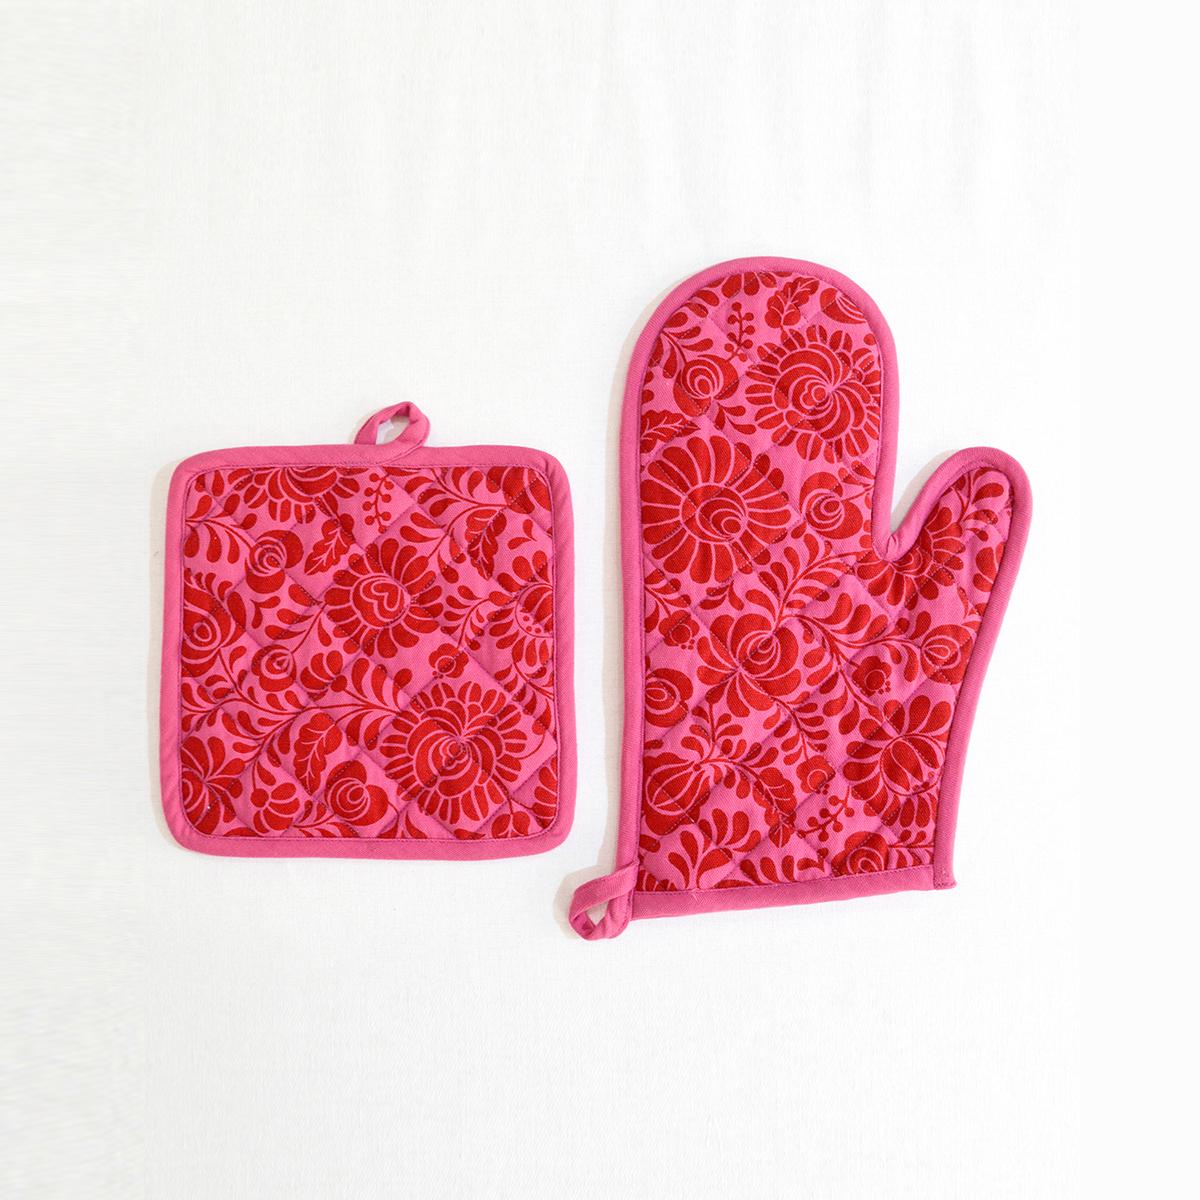 MATYO hot pink floral print Pot holder and Glove, kitchen accessory, 100% cotton, view options